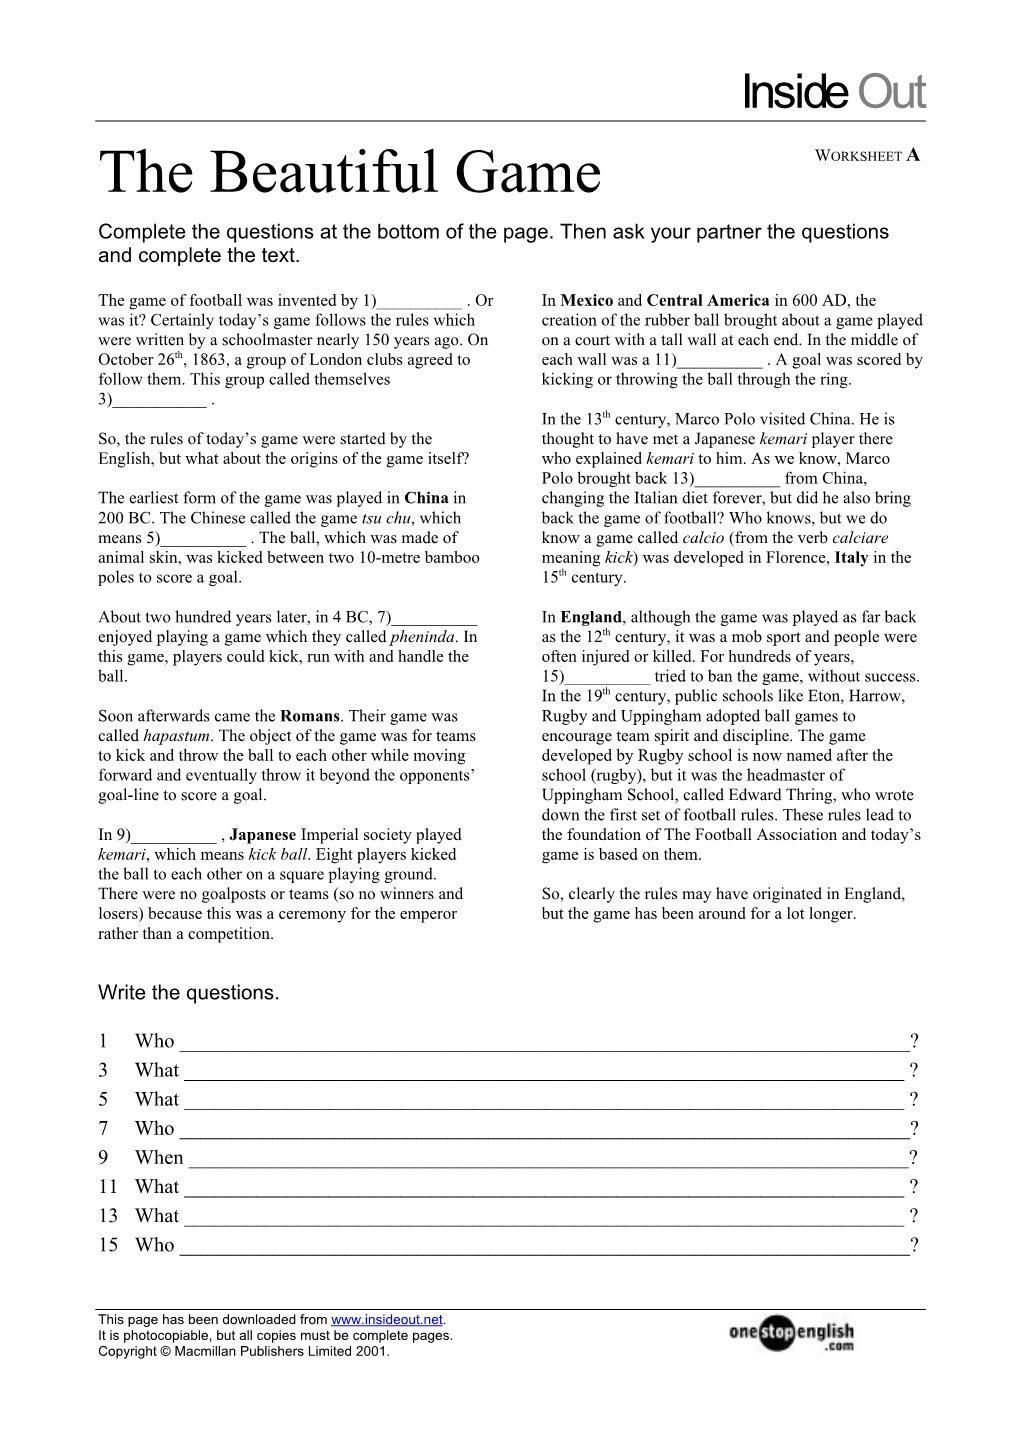 The Beautiful Game WORKSHEET a Complete the Questions at the Bottom of the Page